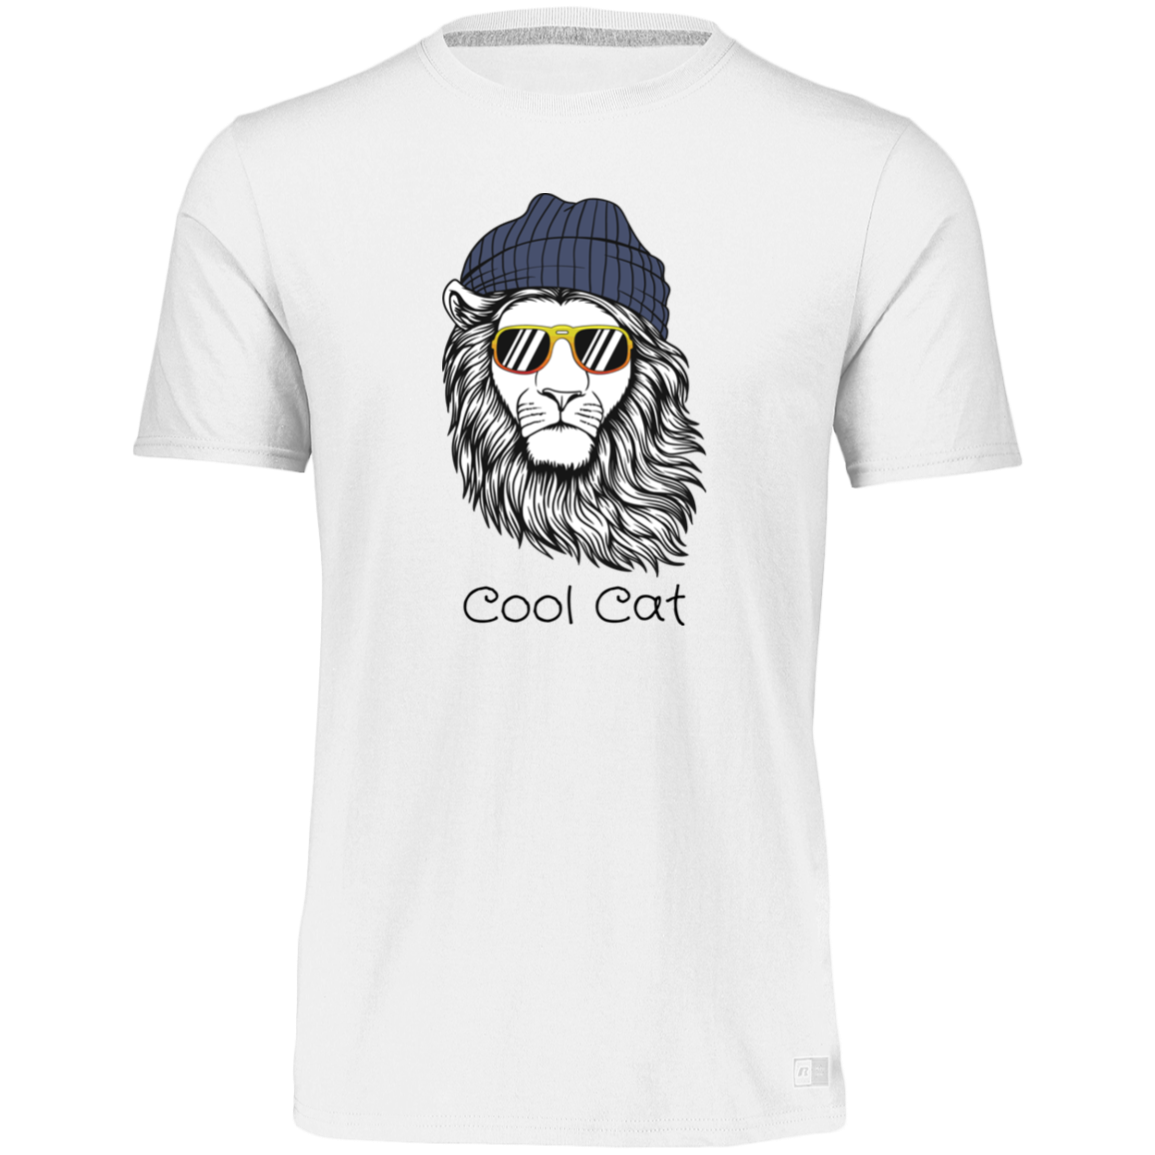 COOL CAT YOUTH ESSENTIAL DRI-POWER TEE